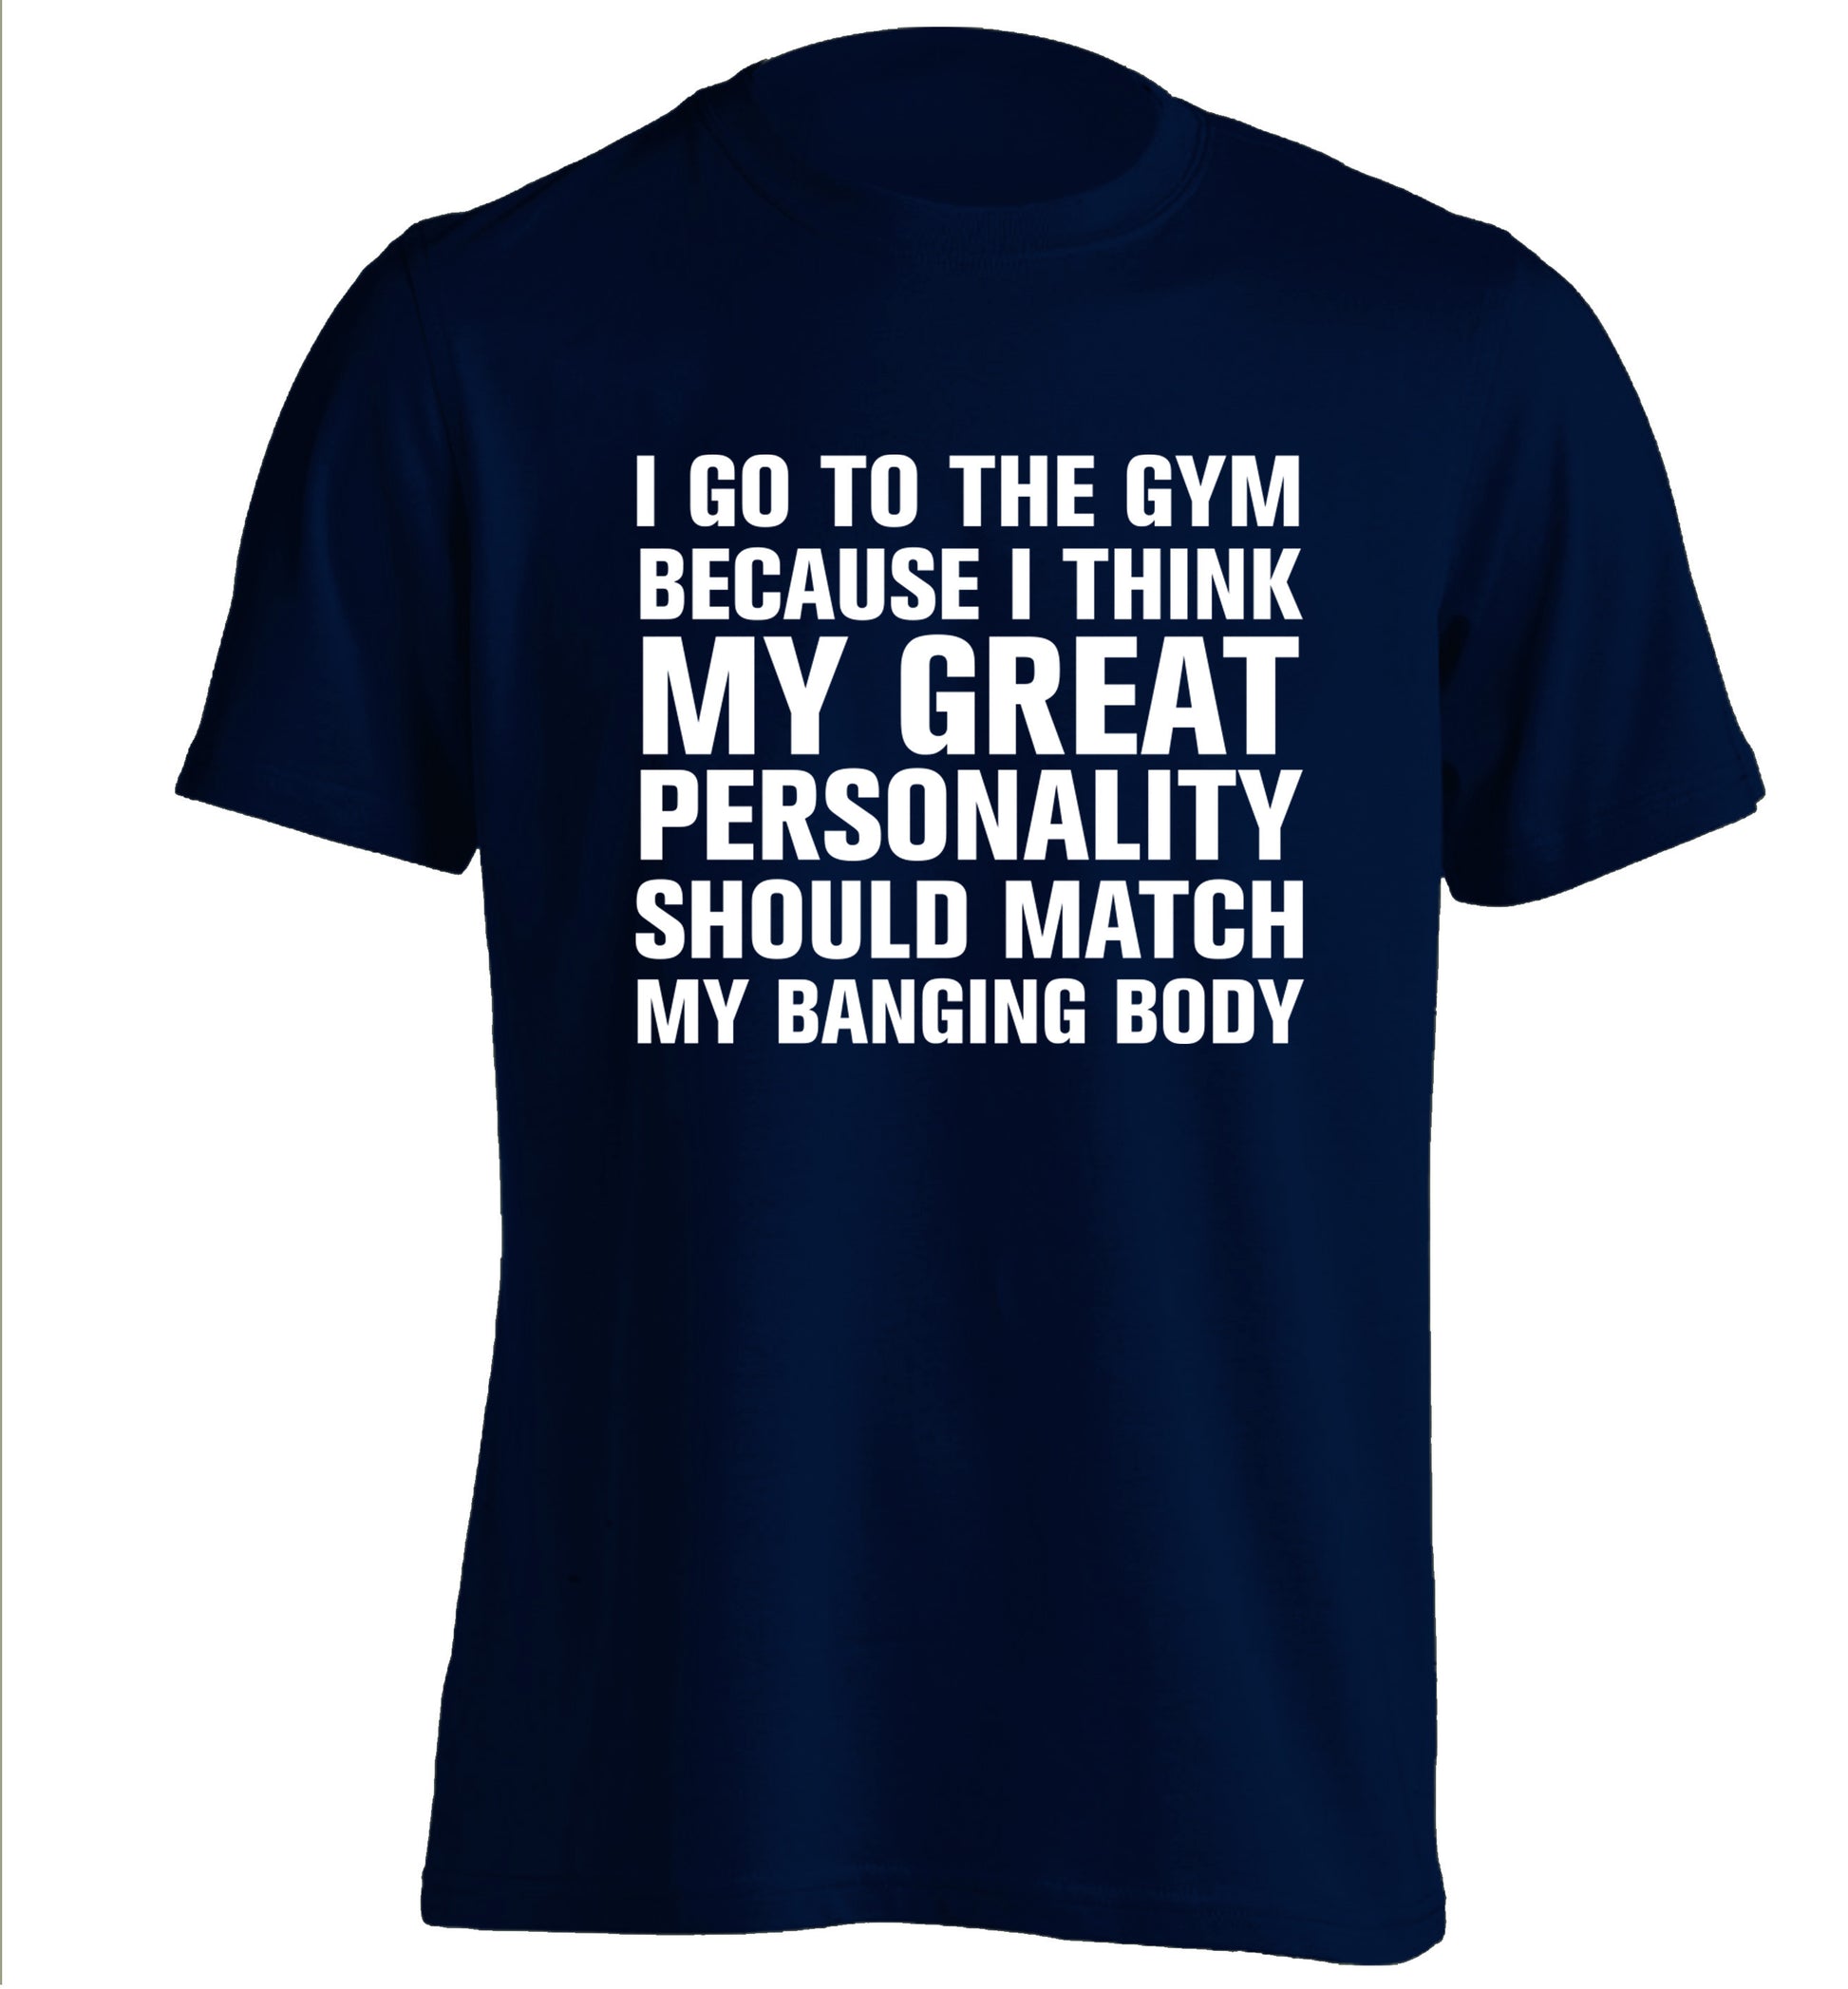 I go to the gym because I think my great personality should match my banging body adults unisex navy Tshirt 2XL